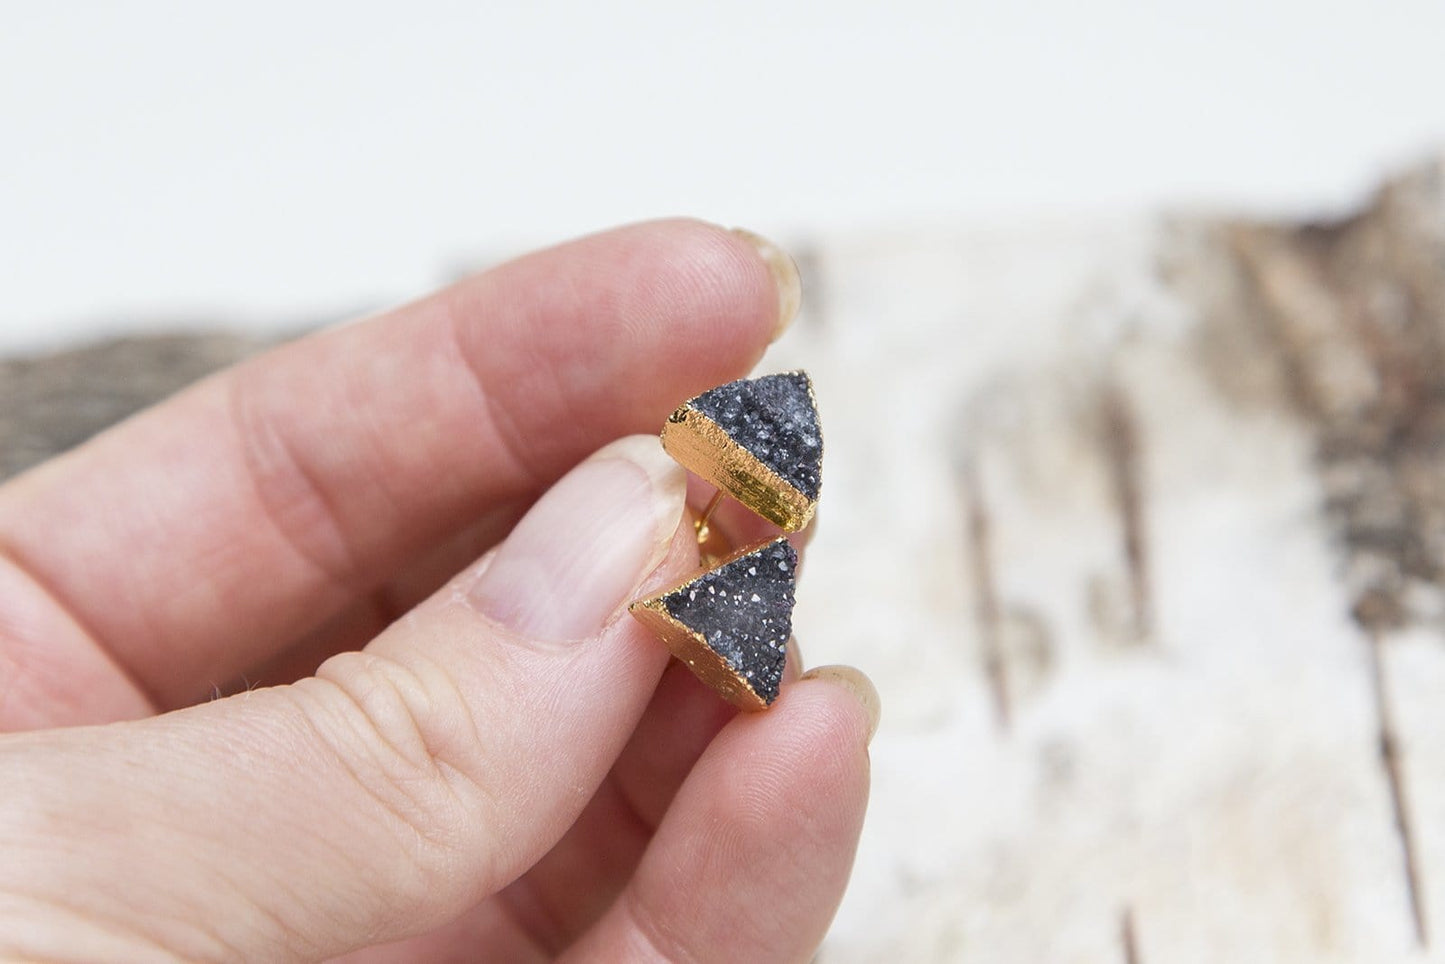 Black triangle druzy earrings - Premium Jewelry & Accessories - Earrings - Shop now at San Rocco Italia